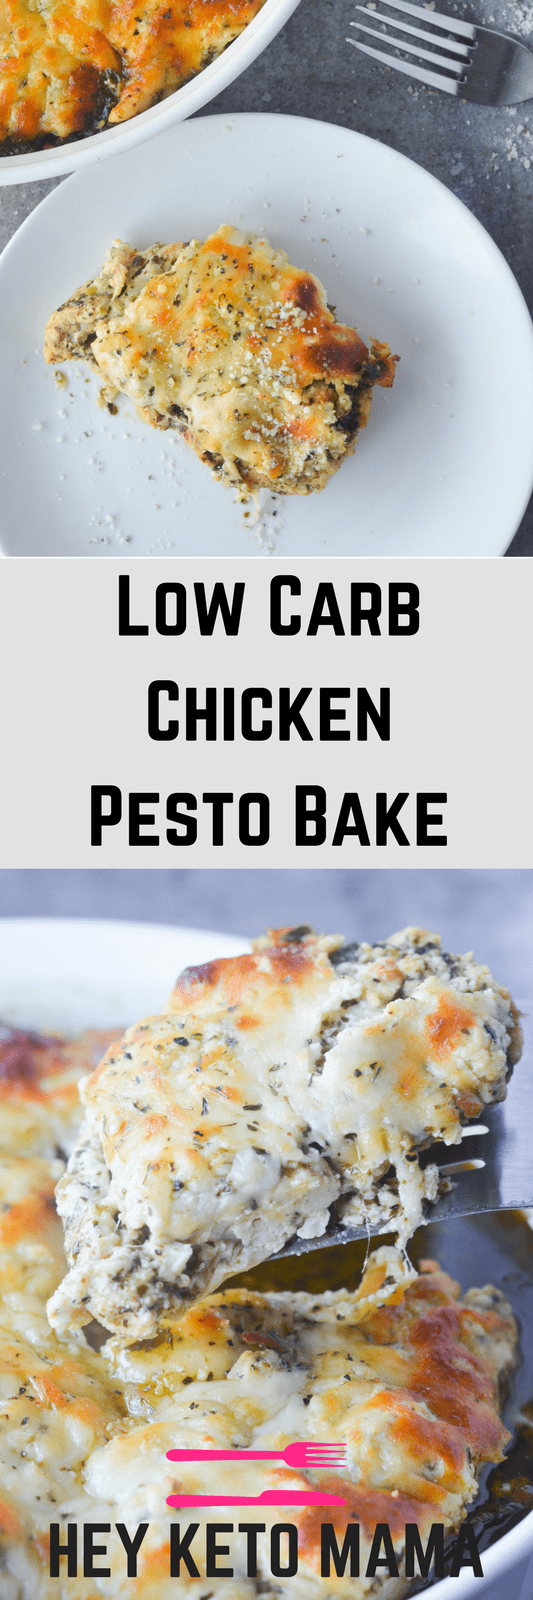 This Low Carb Chicken Pesto Bake is an amazing comfort meal that's actually good for you! It's full of flavor, warmth and CHEESE...doesn't get much better than that! | heyketomama.com